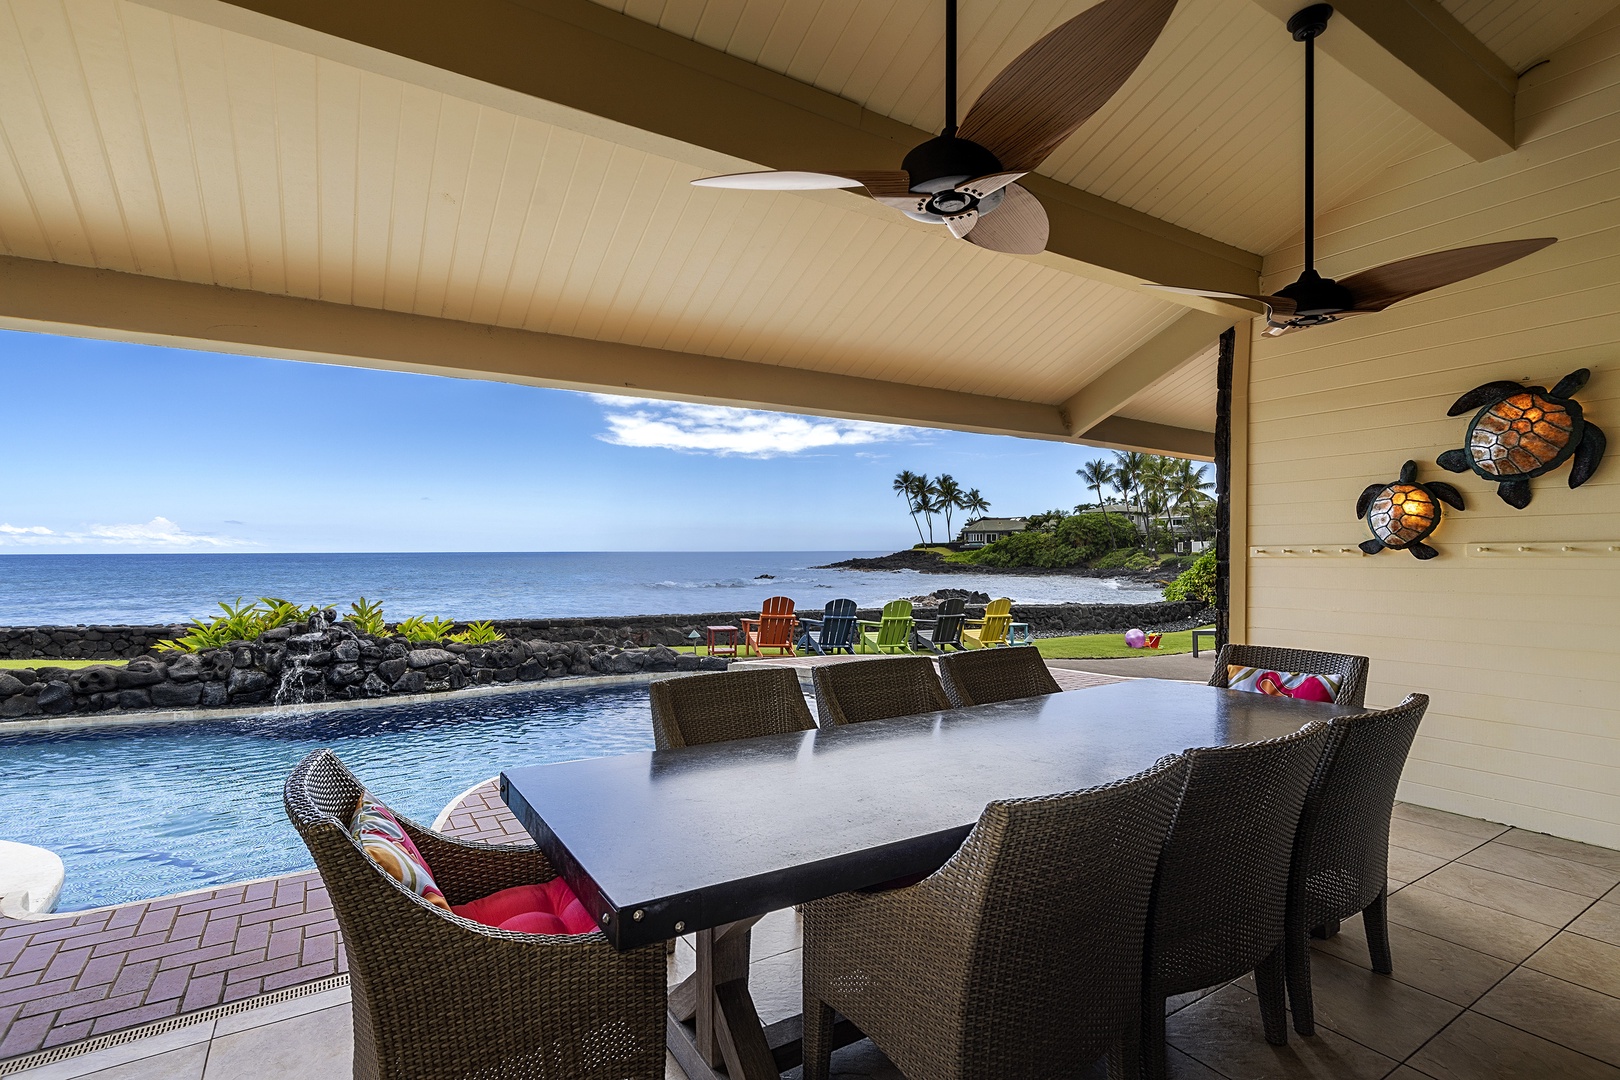 Kailua Kona Vacation Rentals, Hale Pua - Outdoor dining for 8 guests pool side